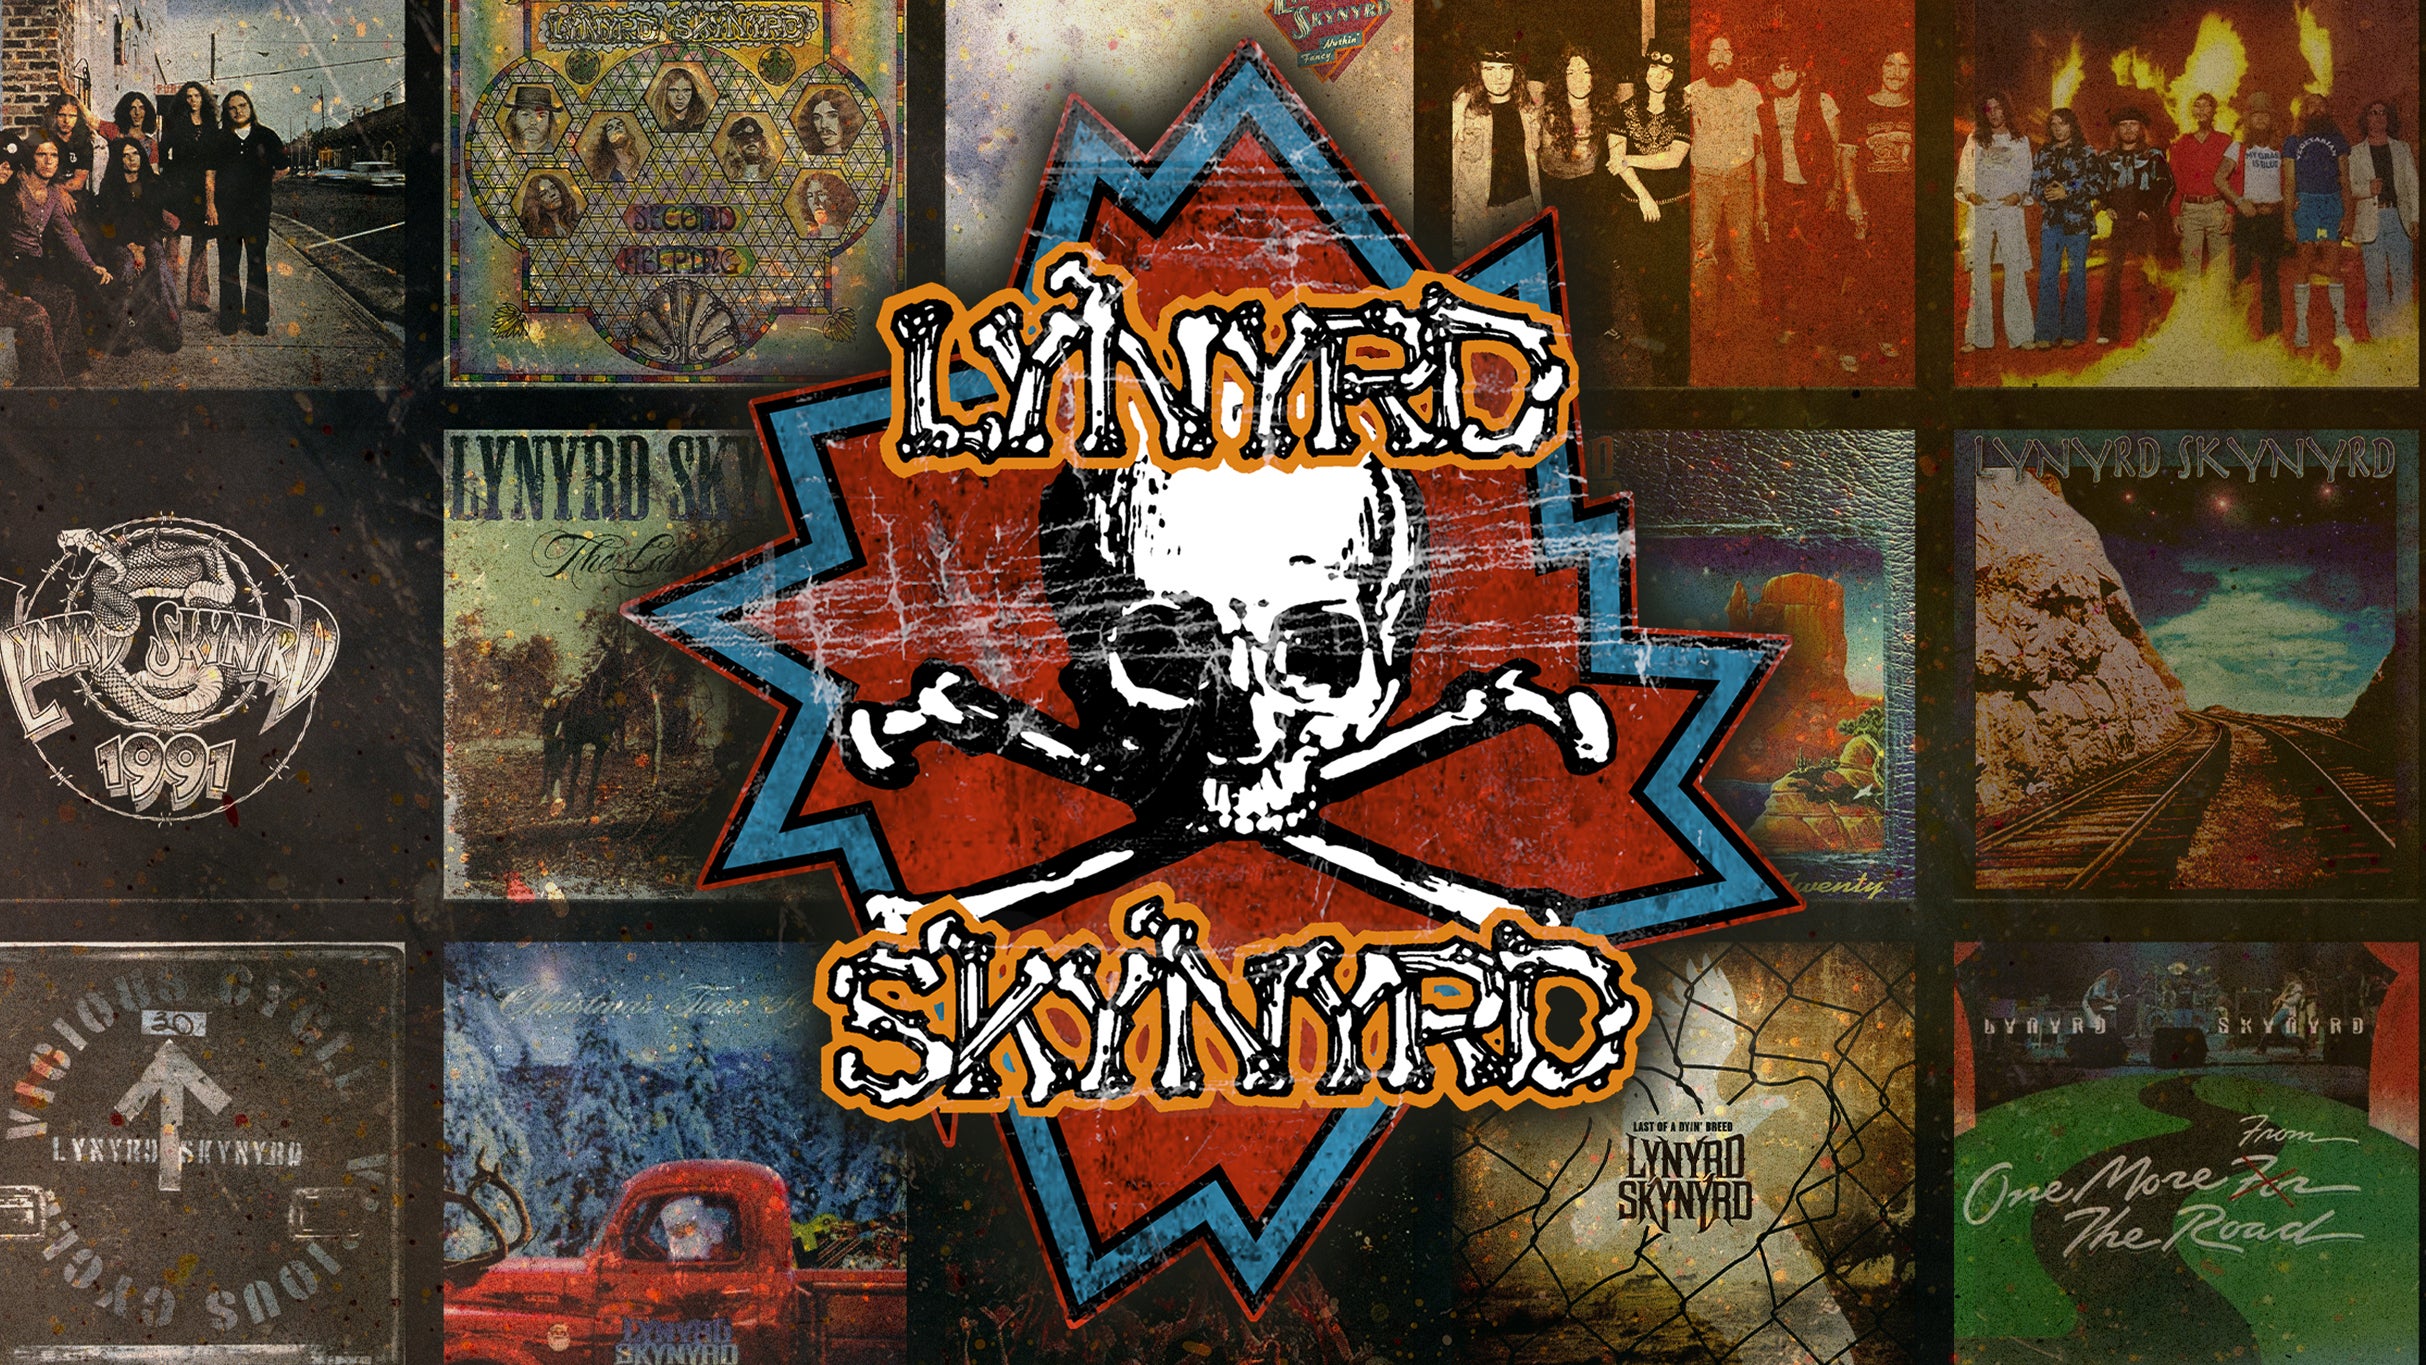 Lynyrd Skynyrd and ZZ Top: The Sharp Dressed Simple Man Tour free presale code for early tickets in Hollywood